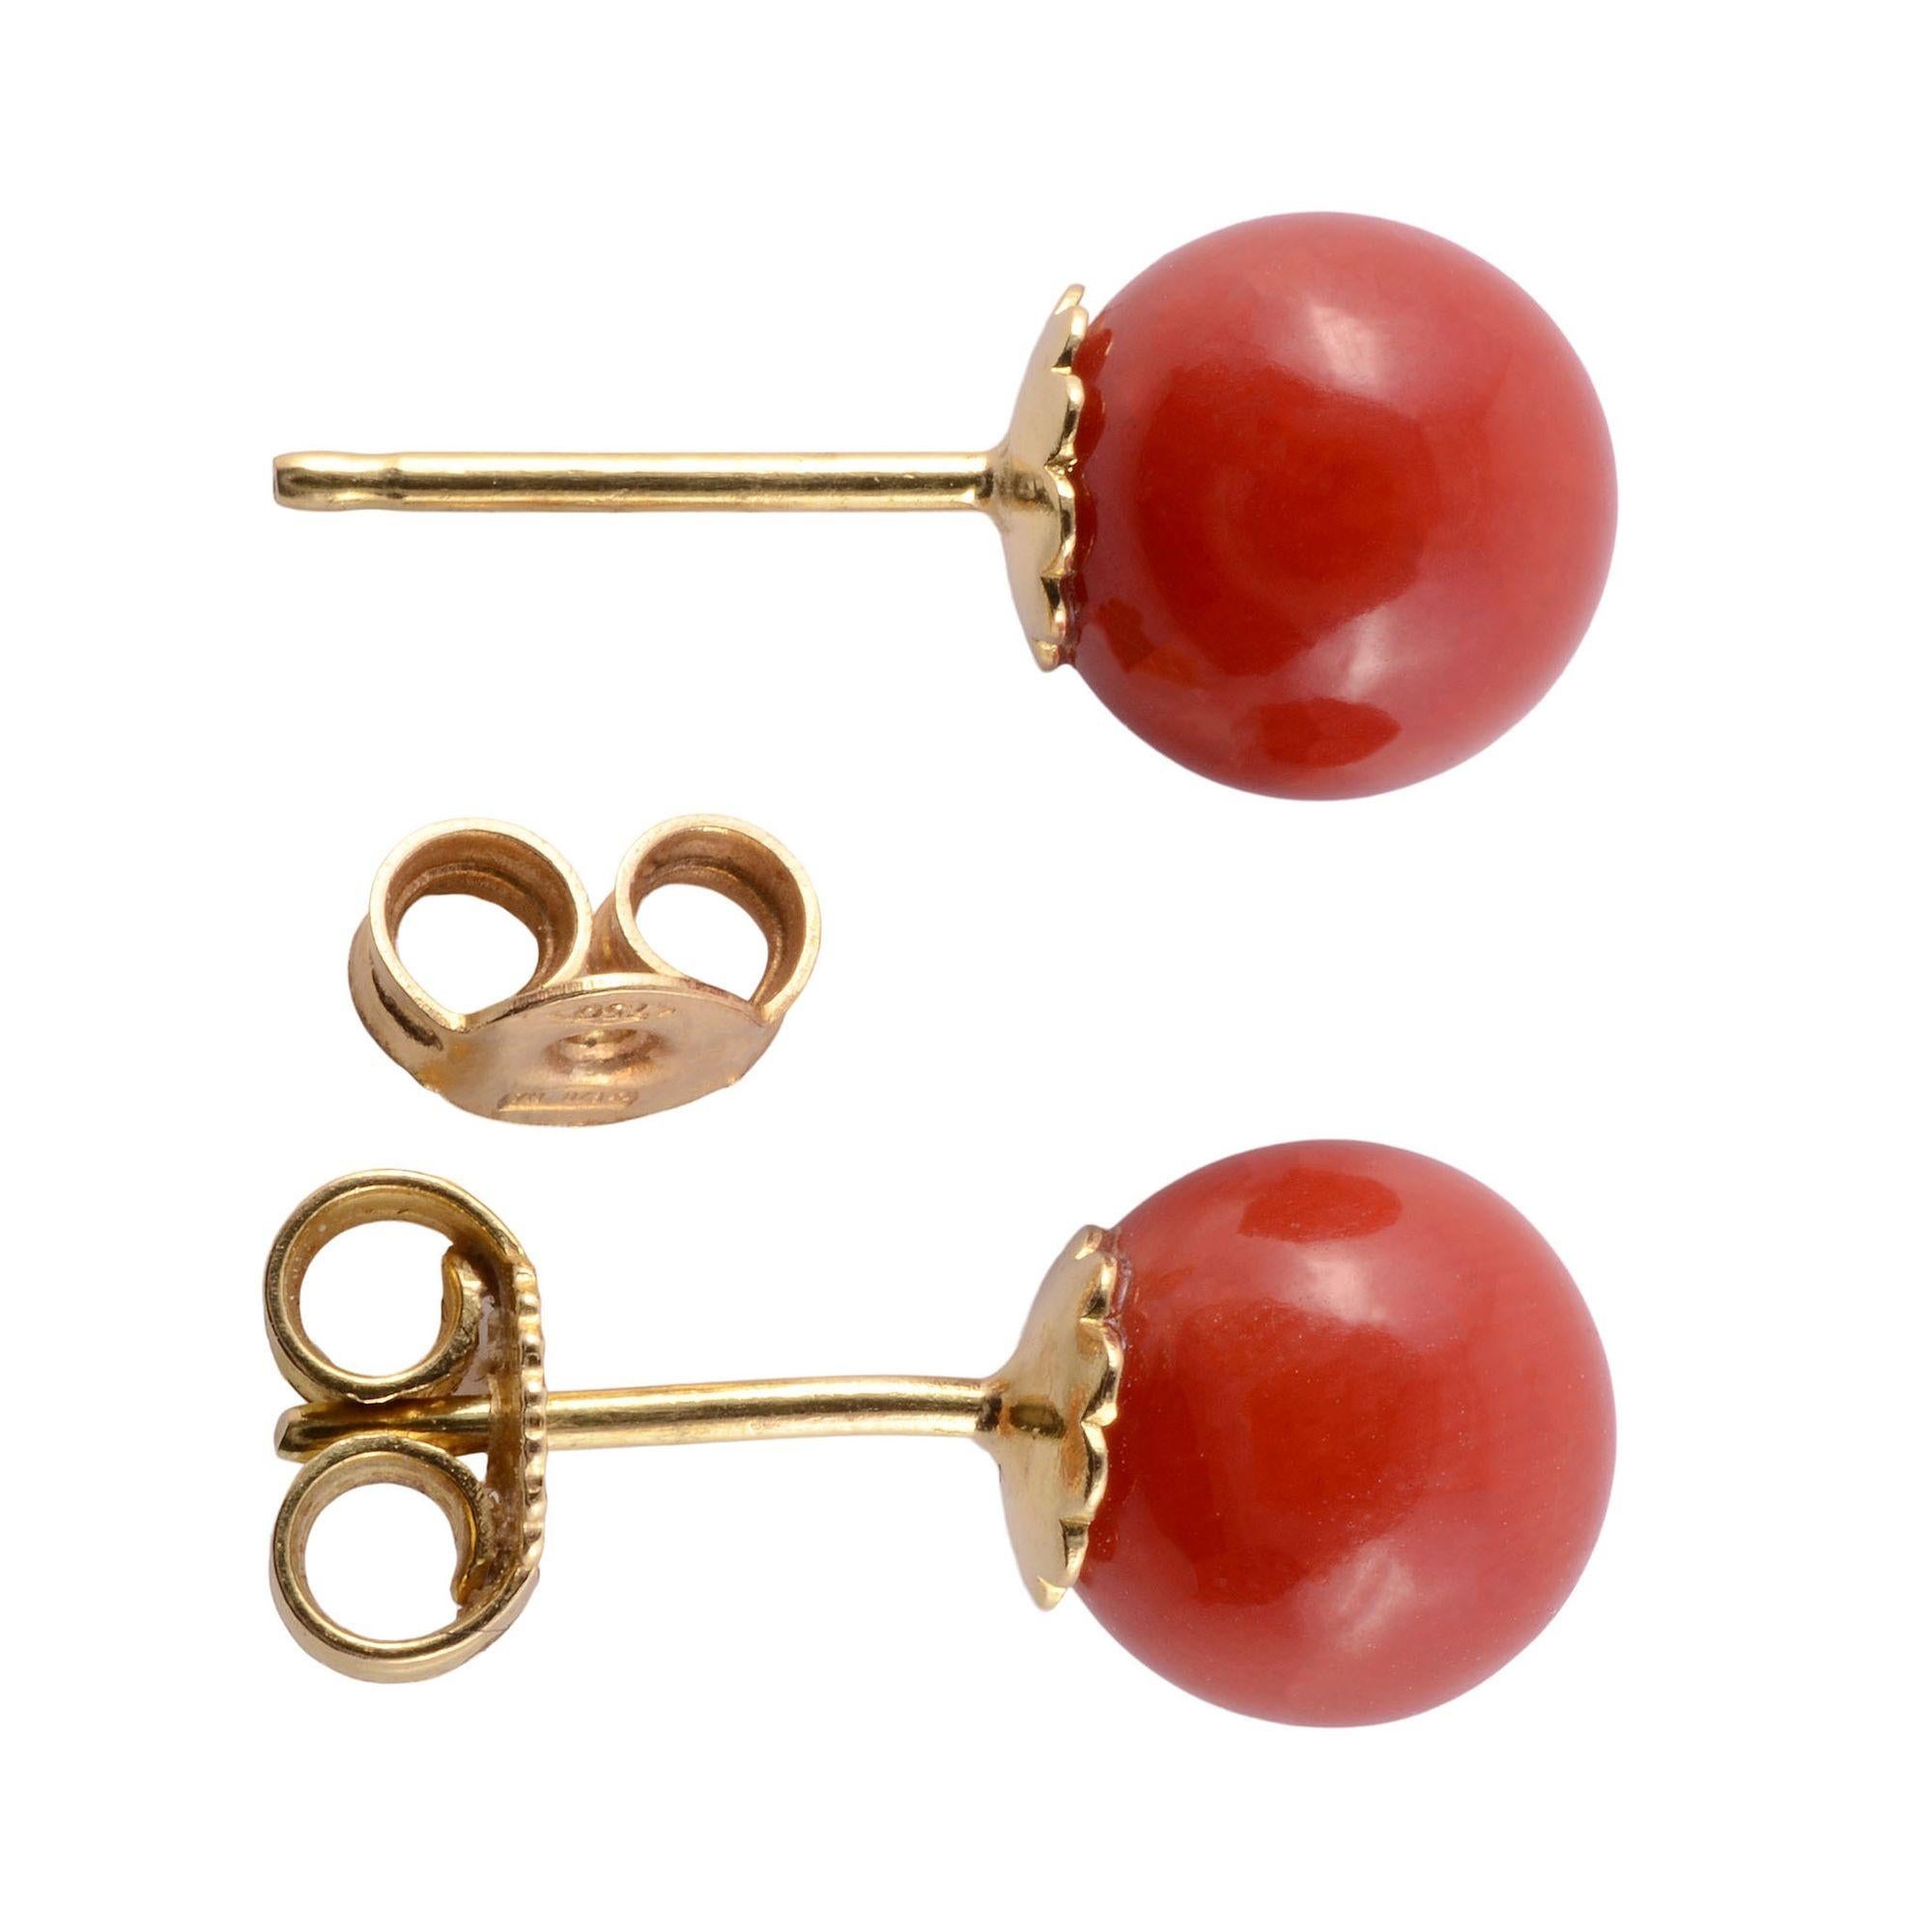 Estate round coral stud earrings. These coral earrings feature 18 karat yellow gold posts and backs. The coral measures 7.5mm diameter. [KIMH 426]